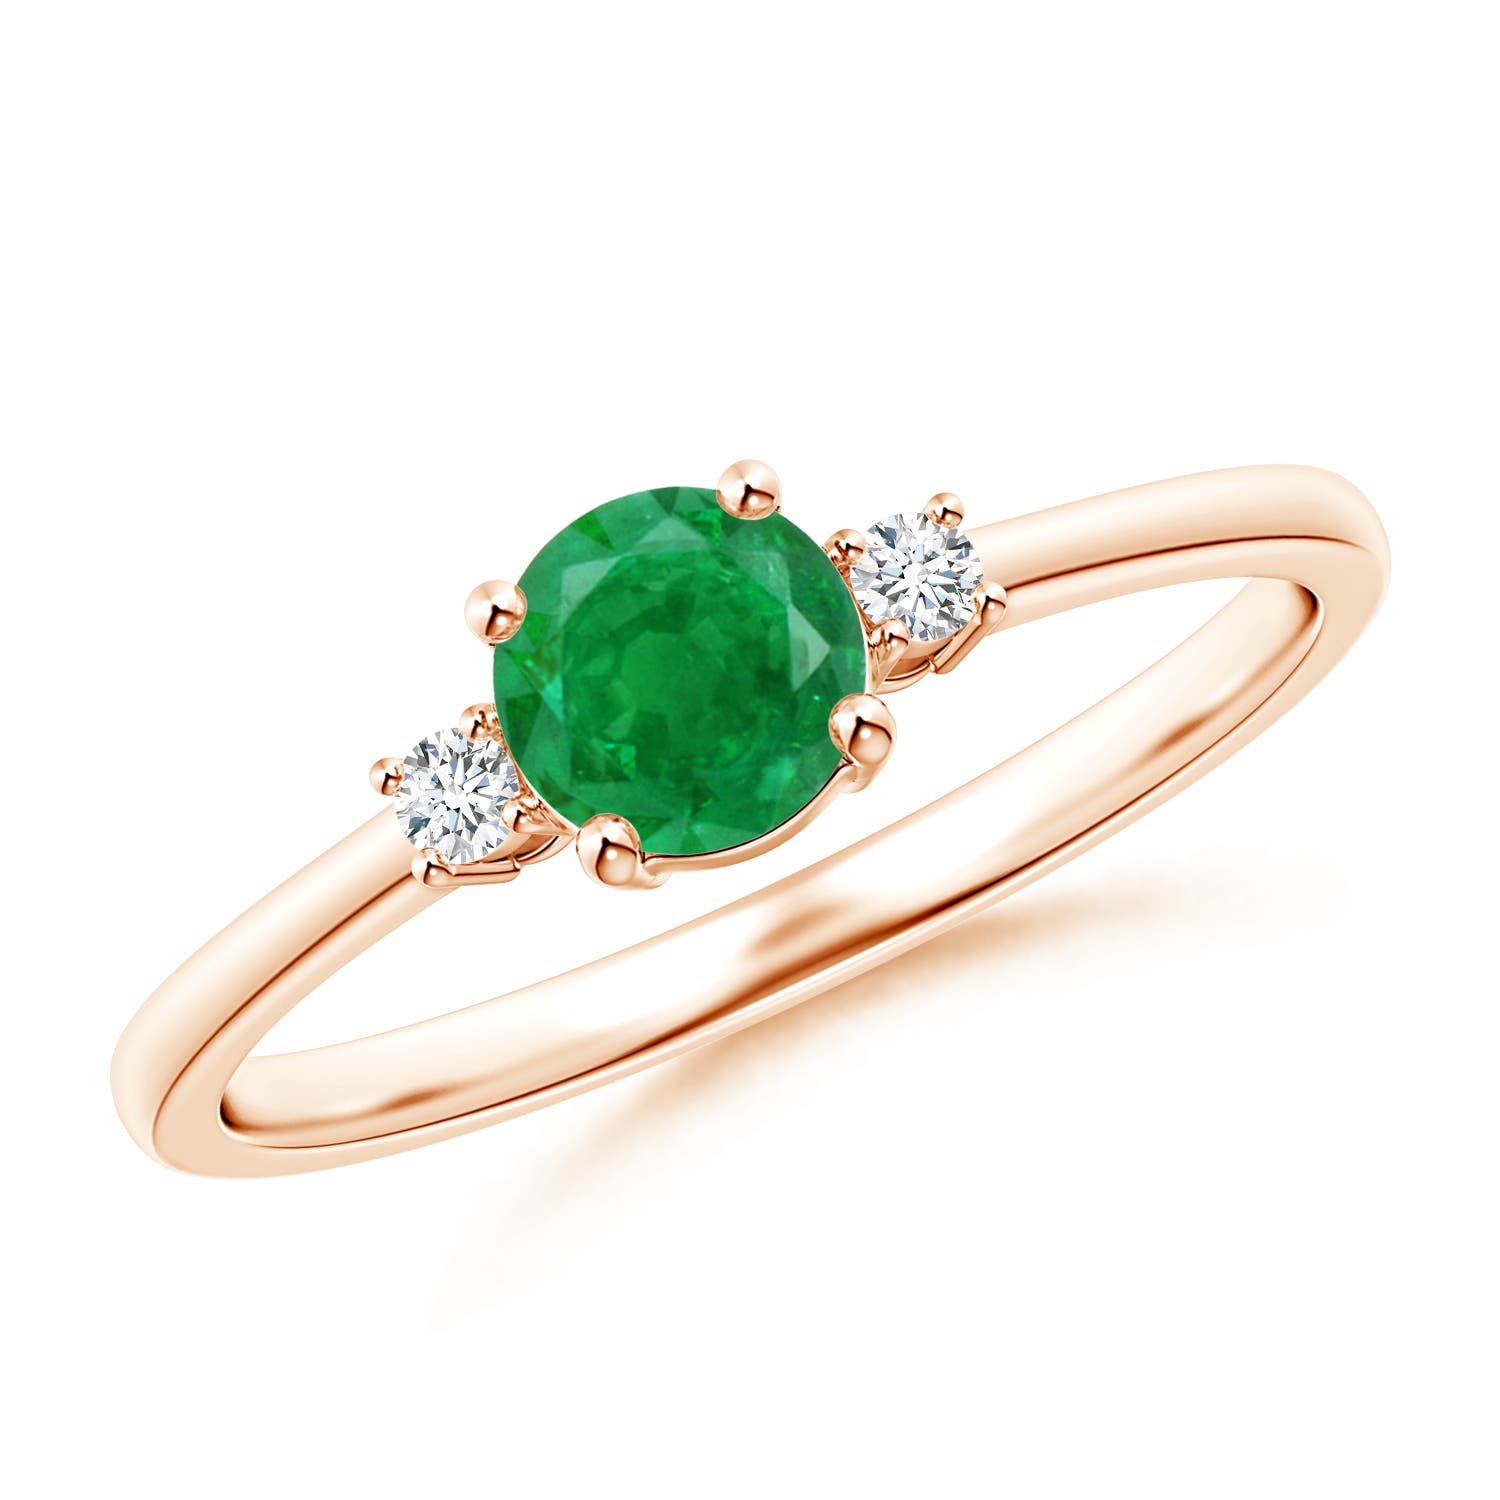 AA - Emerald / 0.51 CT / 14 KT Rose Gold